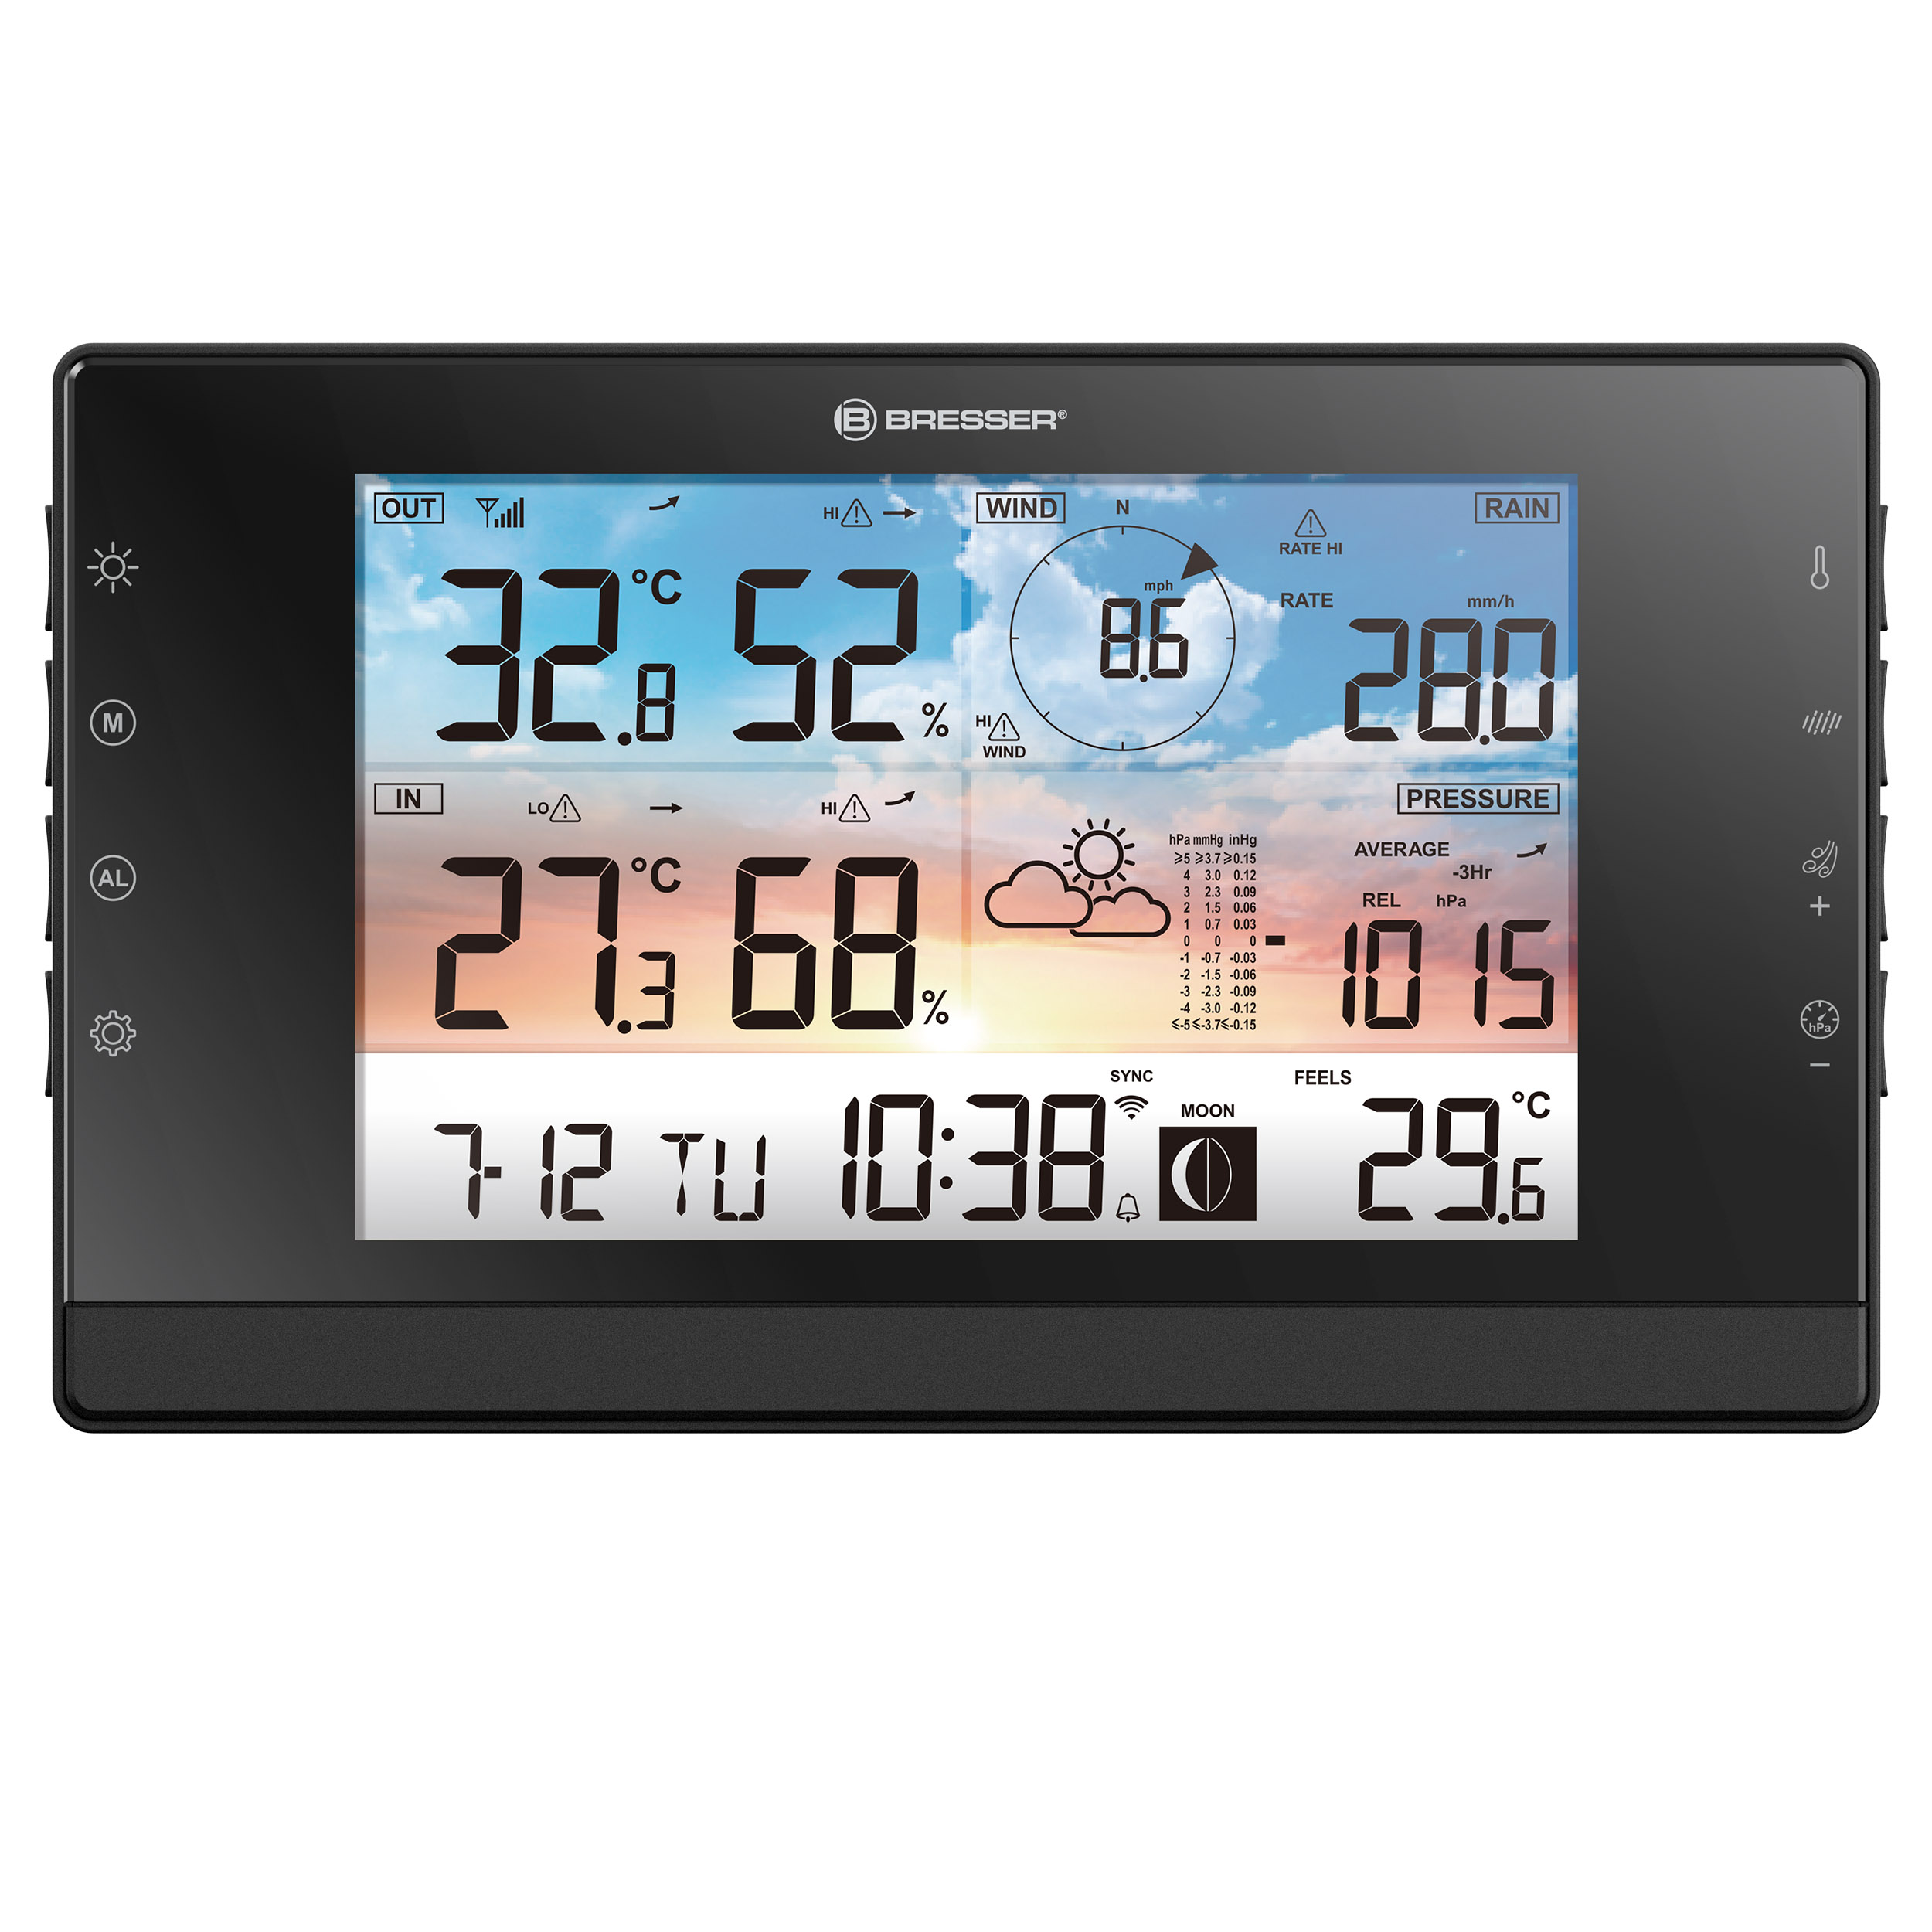 BRESSER WSC Wi-Fi Weather Station with 5-in-1 Multi-Sensor